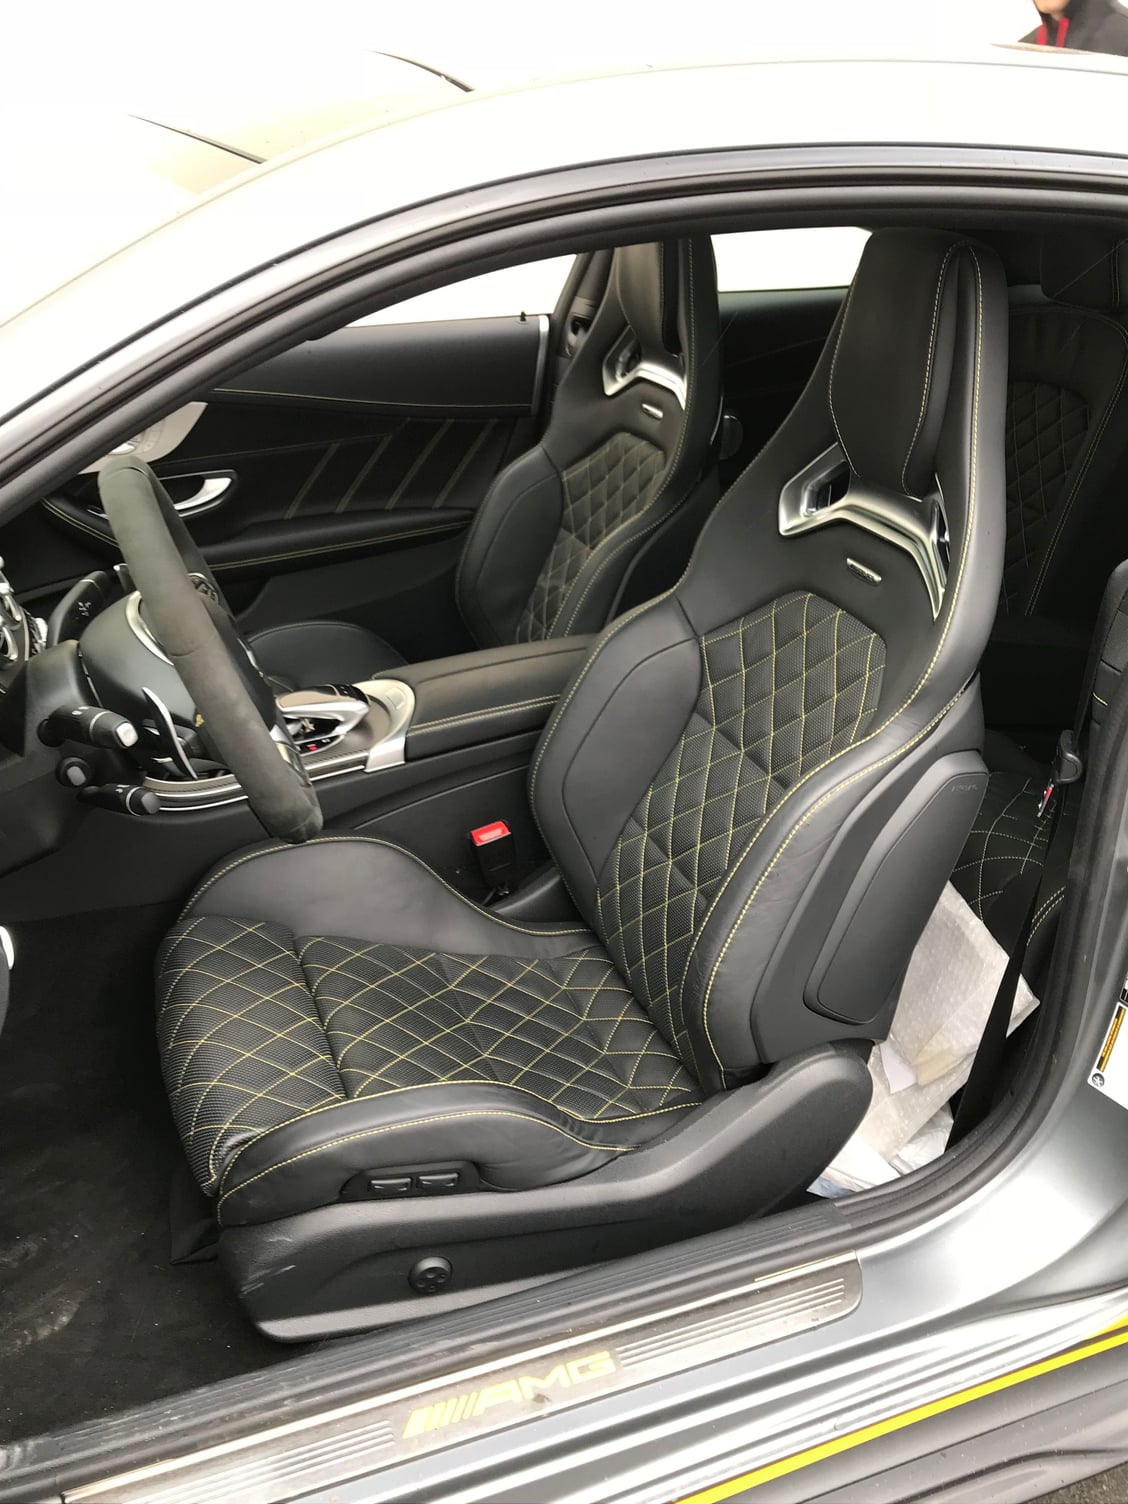 2010 Mercedes-Benz SLK350 - Front and rear seats - Interior/Upholstery - $6,000 - Kent, WA 98032, United States